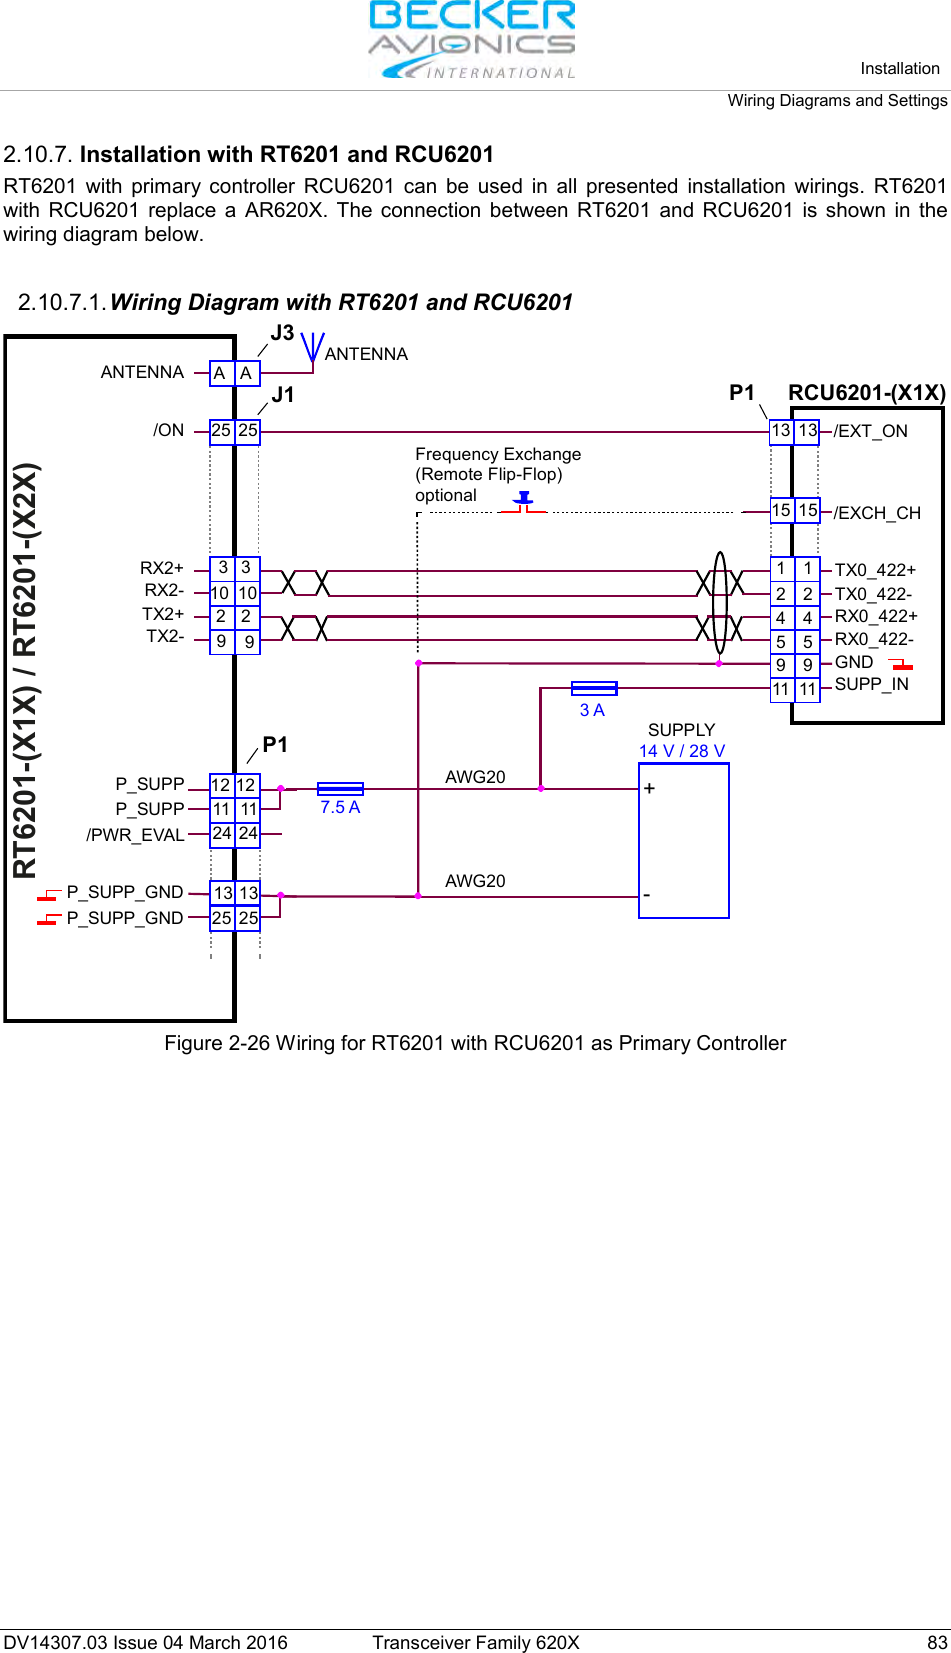   Installation Wiring Diagrams and Settings  DV14307.03 Issue 04 March 2016 Transceiver Family 620X 83 2.10.7. Installation with RT6201 and RCU6201 RT6201 with primary controller RCU6201 can be used in all presented  installation wirings. RT6201 with RCU6201 replace a AR620X. The connection between RT6201 and RCU6201 is shown in the wiring diagram below.   2.10.7.1. Wiring Diagram with RT6201 and RCU6201 ANTENNA7.5 A3 AAWG20AWG20Frequency Exchange(Remote Flip-Flop)optionalJ3J1P1P1ANTENNA/ONRX2+RX2-TX2+TX2-/EXT_ON/EXCH_CHTX0_422+TX0_422-RX0_422+RX0_422-GNDSUPP_INAA24 2412 1211 1113 1325 25 13 1315 151 12 24 45 59 911 1125 2510 103 32 299RT6201-(X1X) / RT6201-(X2X)RCU6201-(X1X)P_SUPPP_SUPP/PWR_EVALP_SUPP_GNDP_SUPP_GND+-SUPPLY14 V / 28 V Figure 2-26 Wiring for RT6201 with RCU6201 as Primary Controller  